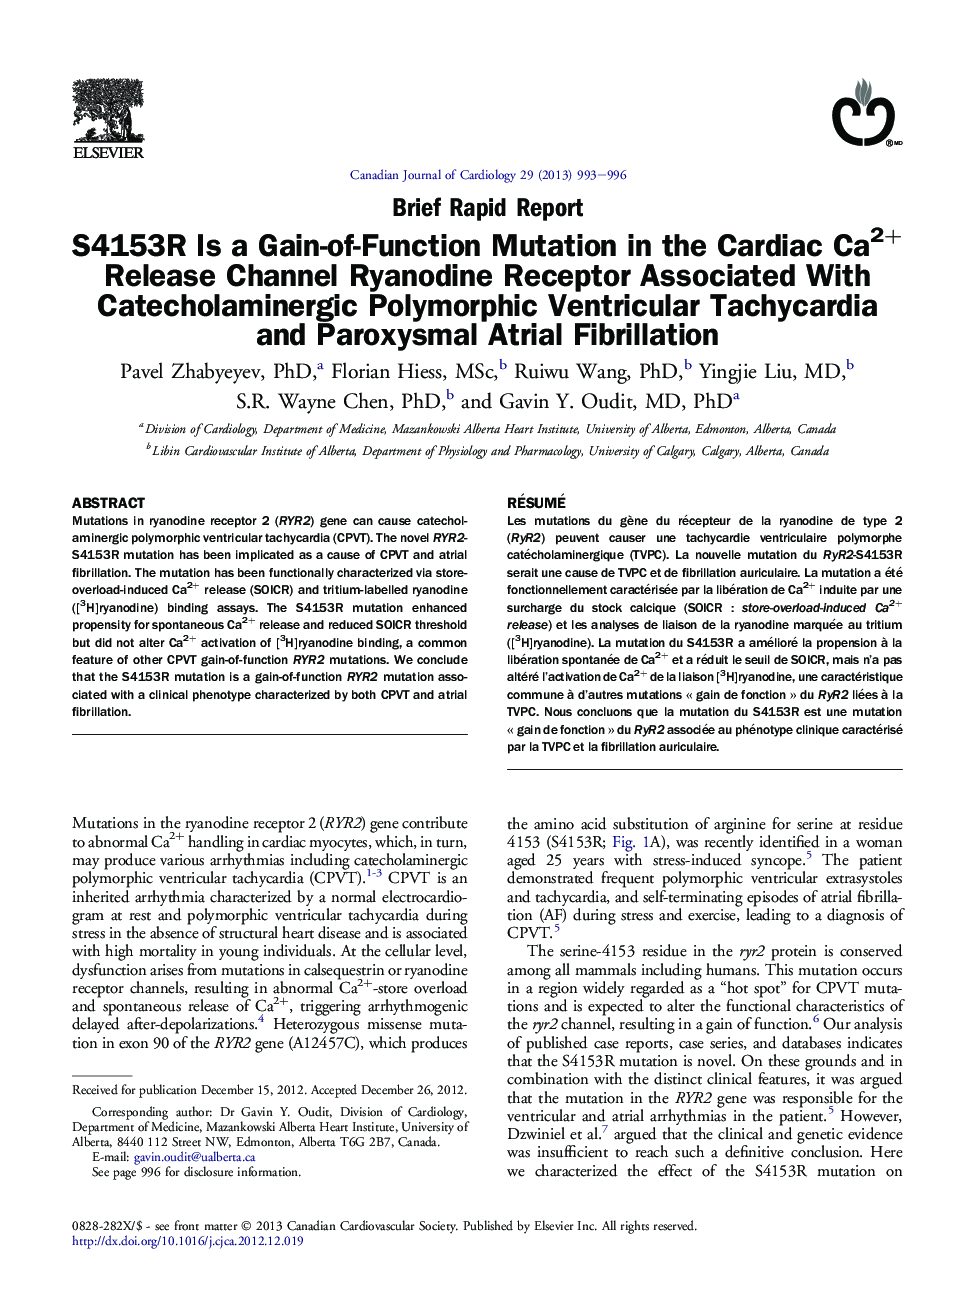 S4153R Is a Gain-of-Function Mutation in the Cardiac Ca2+ Release Channel Ryanodine Receptor Associated With Catecholaminergic Polymorphic Ventricular Tachycardia and Paroxysmal Atrial Fibrillation 